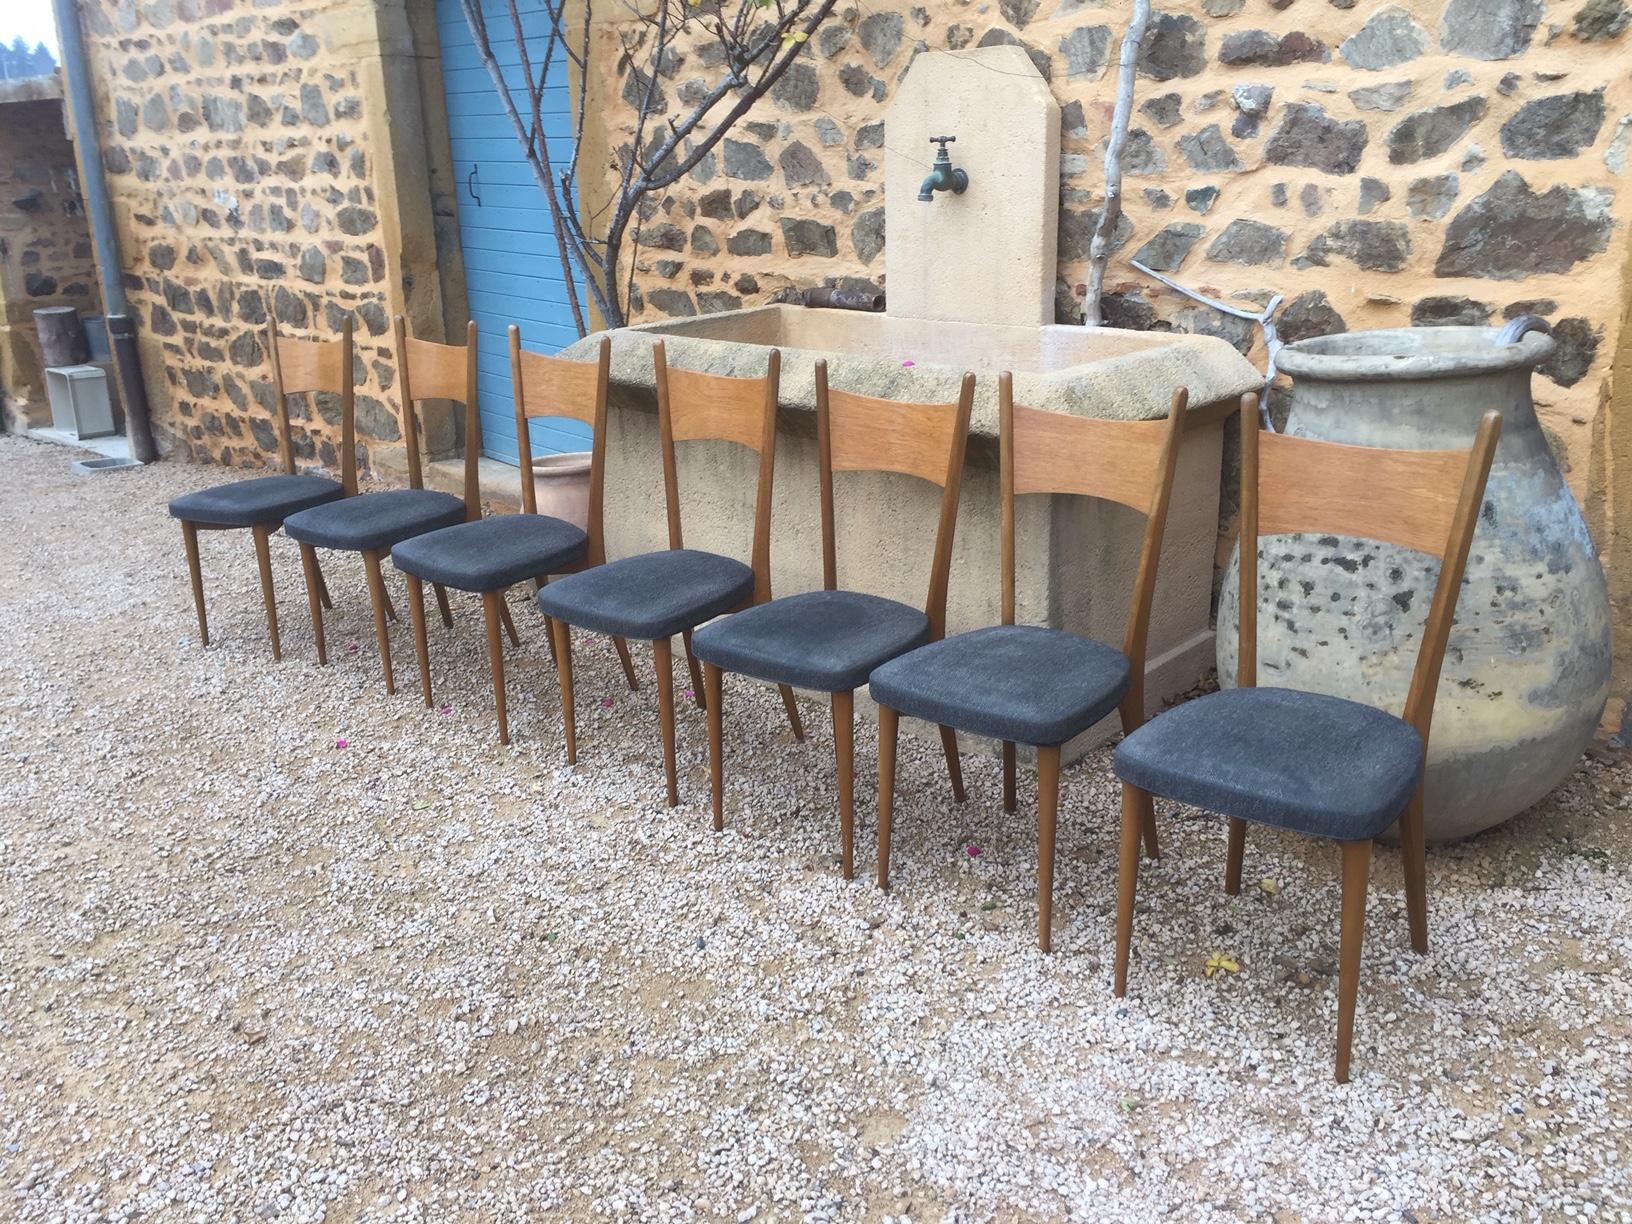 Beautiful 20th century set of seven Scandinavian chairs from the 1960s.
Dark grey fabric (a little bit dirty but not damage). The chairs are in very good condition.